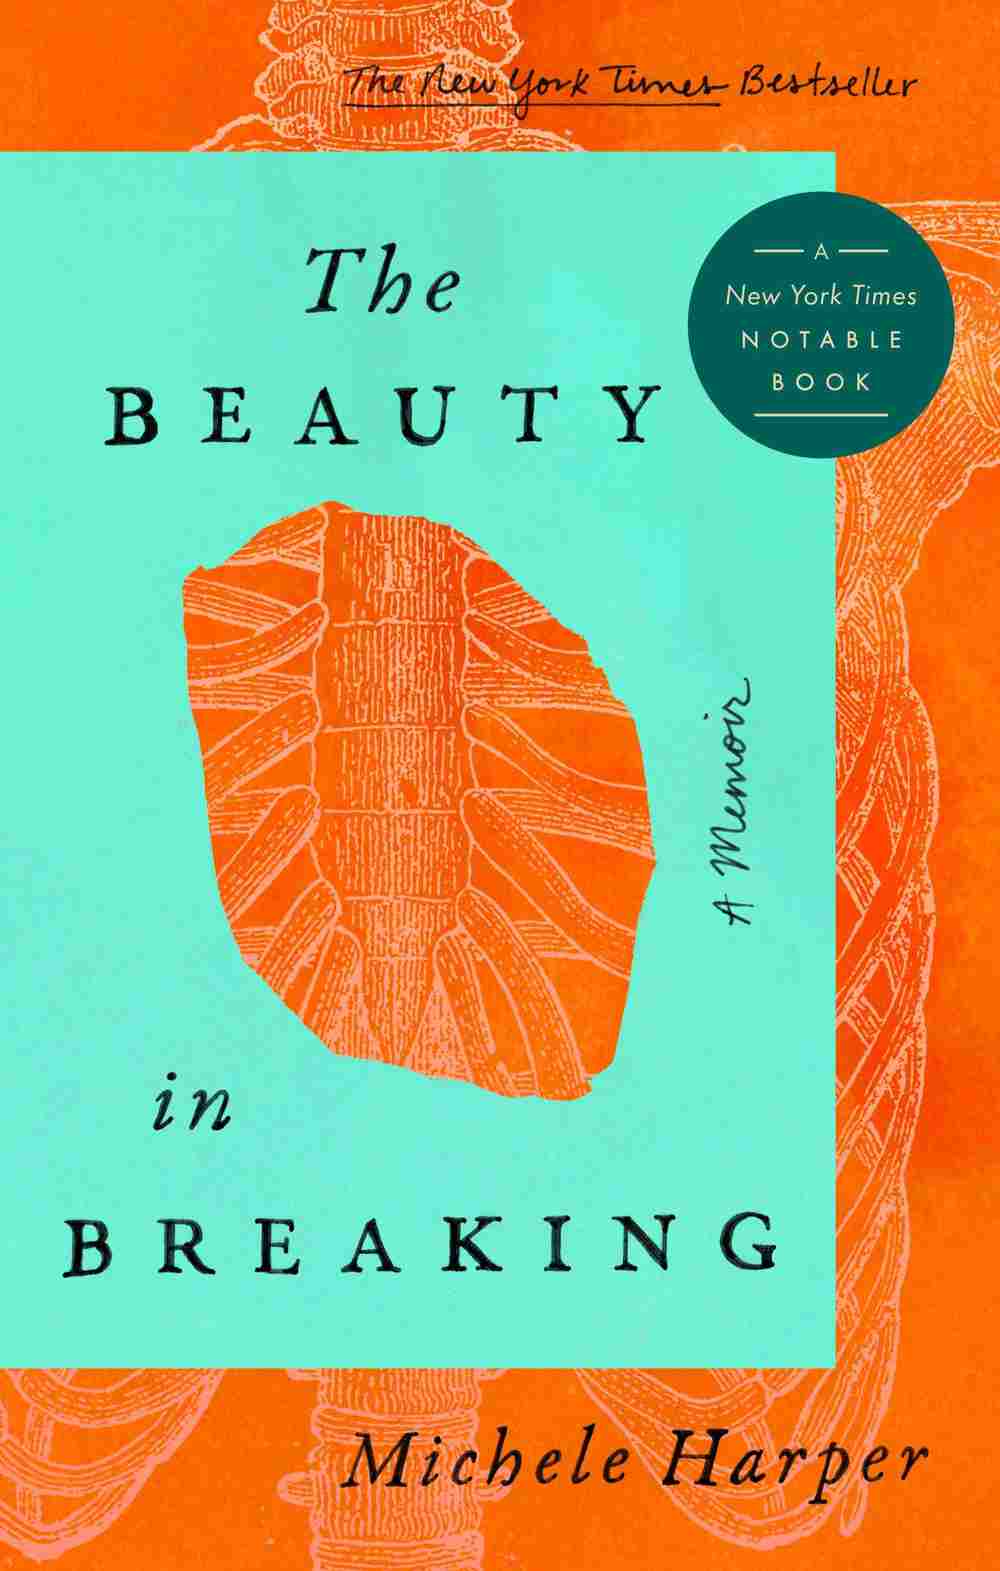 Compassion as a 'Defiant Social Action': A Response to The Beauty in Breaking